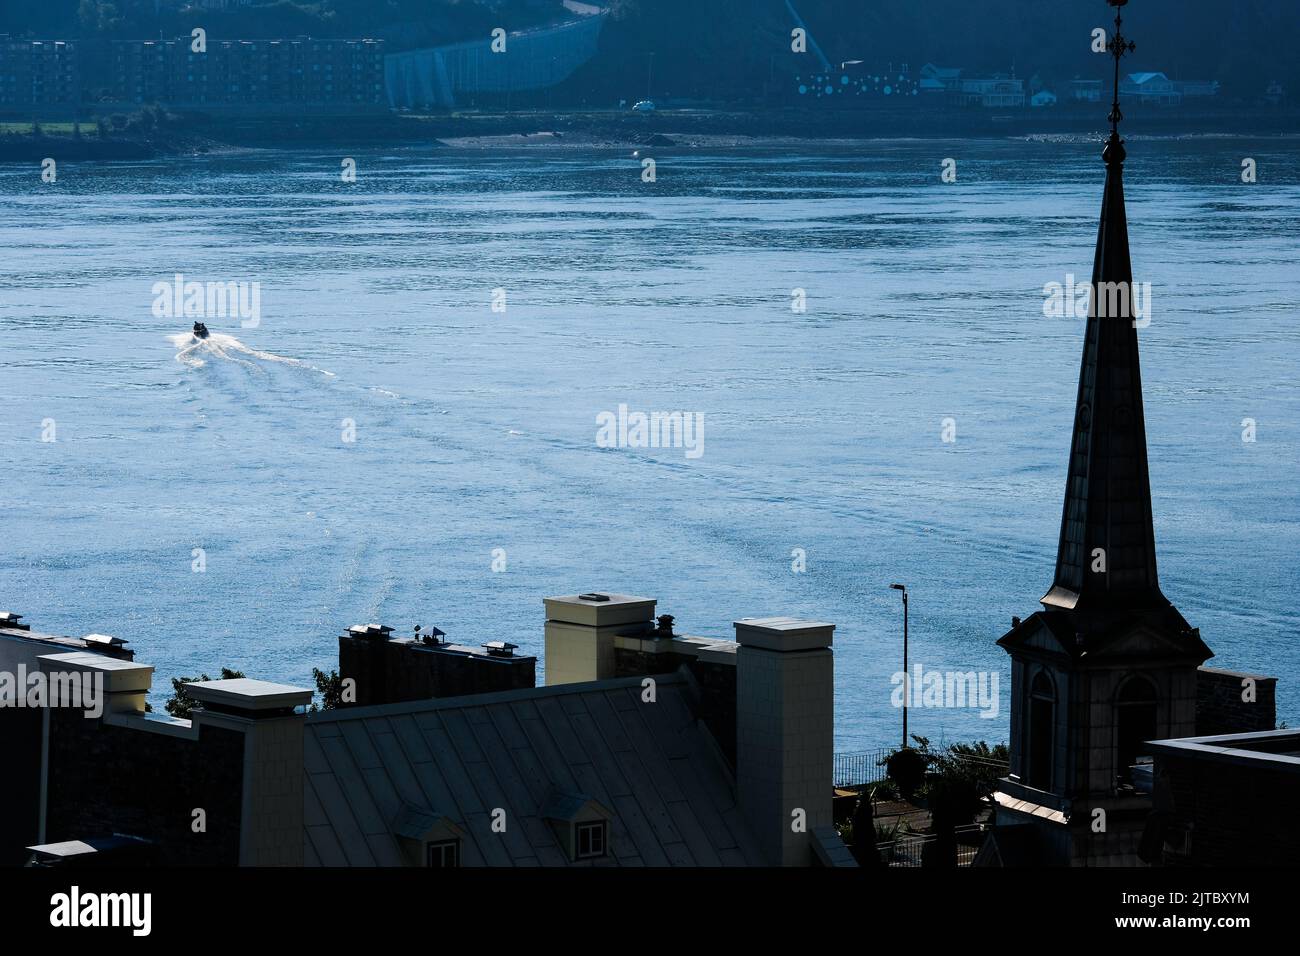 St. Lawrence River in old port, Quebec City, Quebec, Canada. Stock Photo